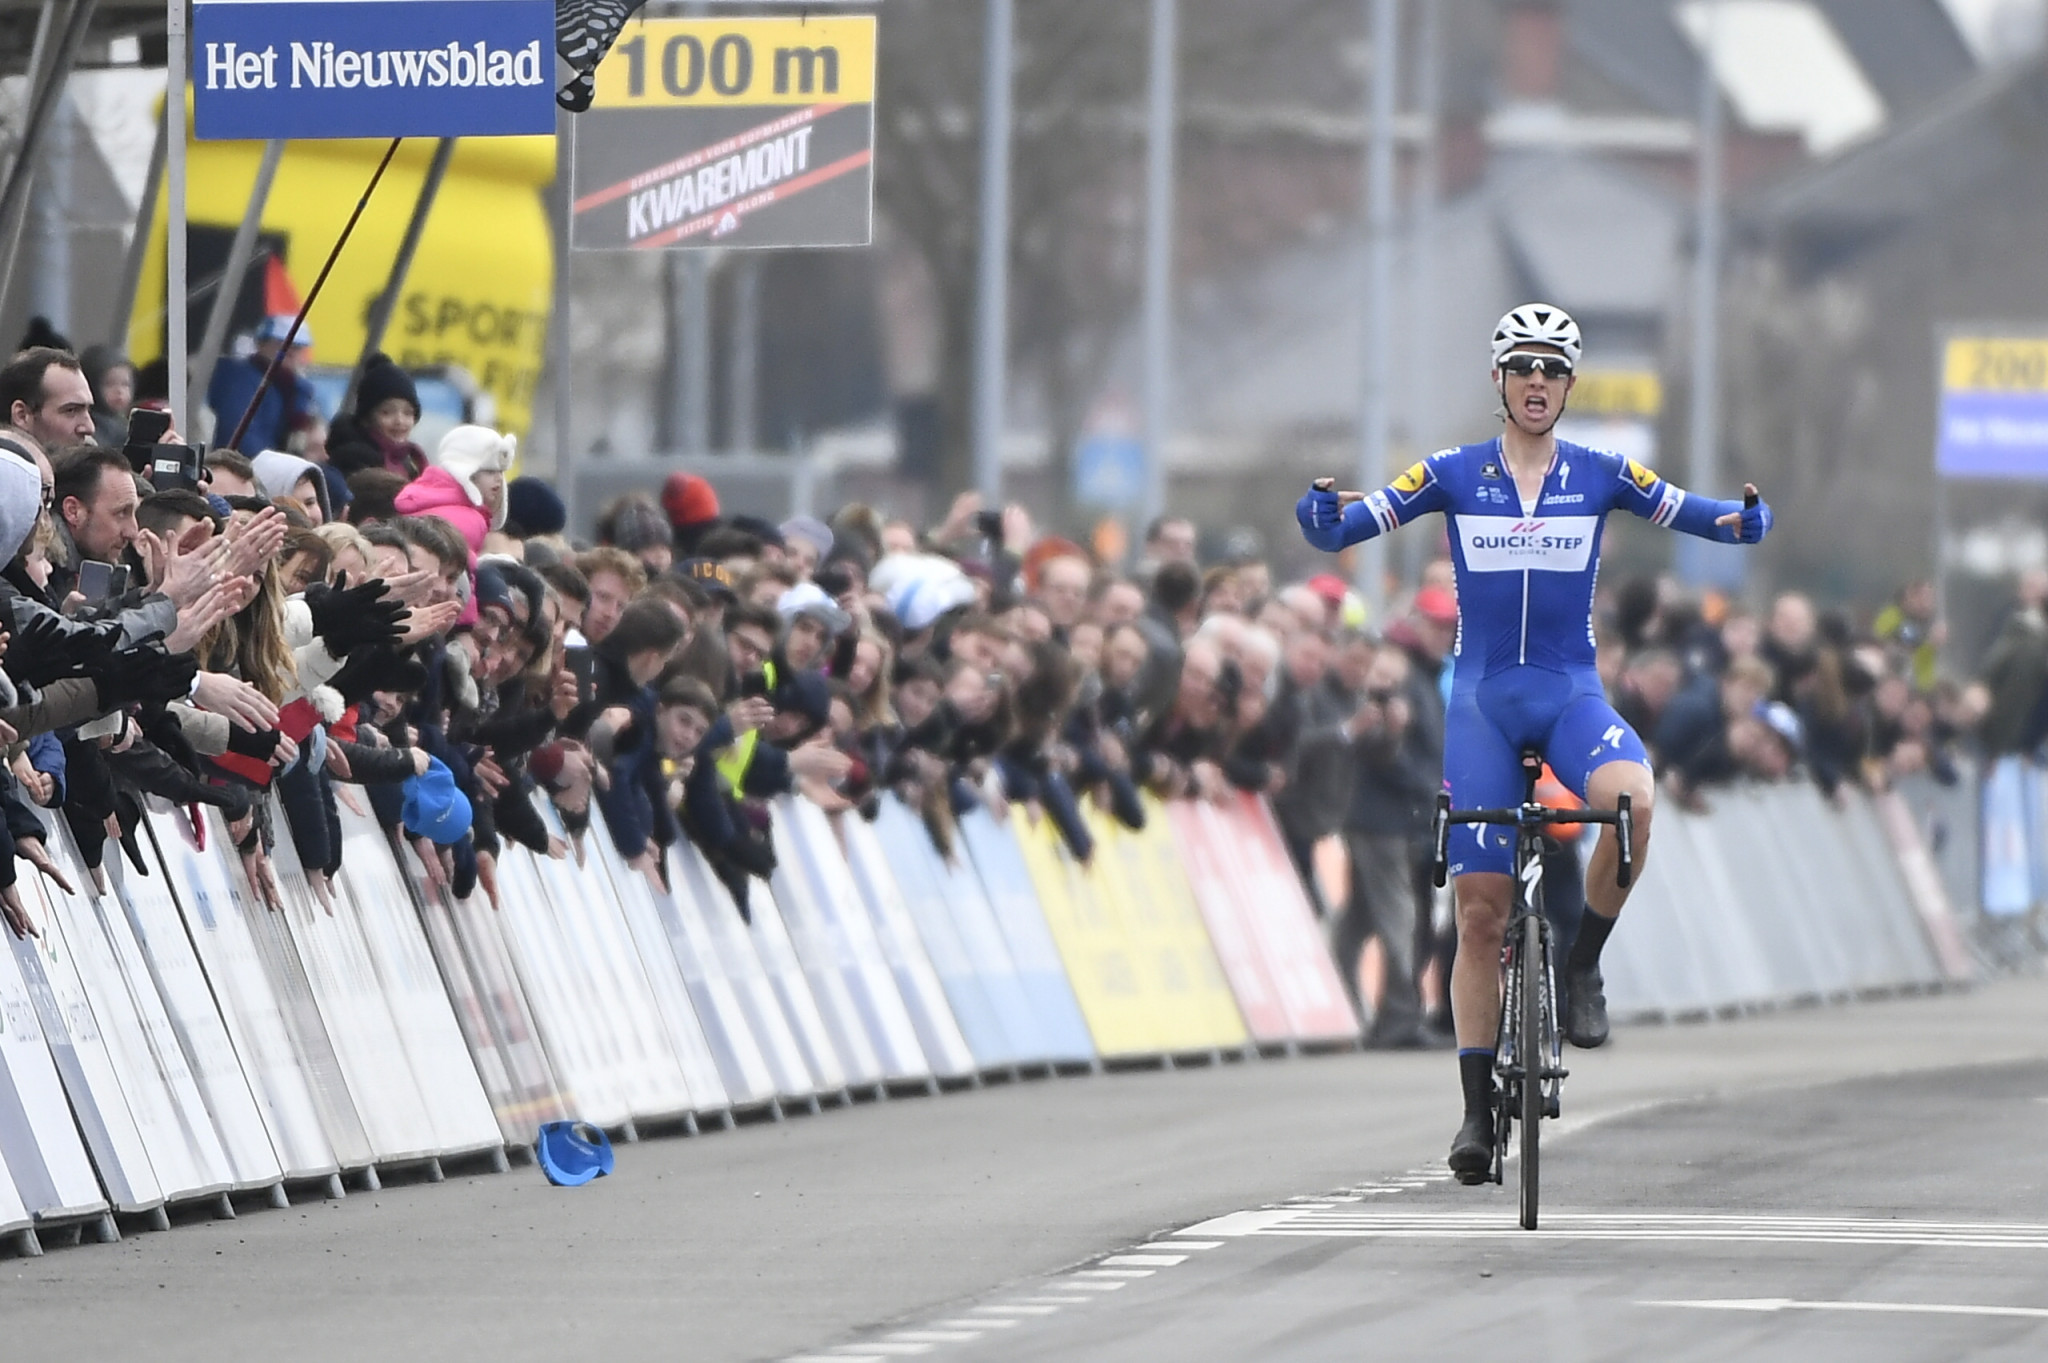 Terpstra takes solo win at E3 Harebeke race in Belgium